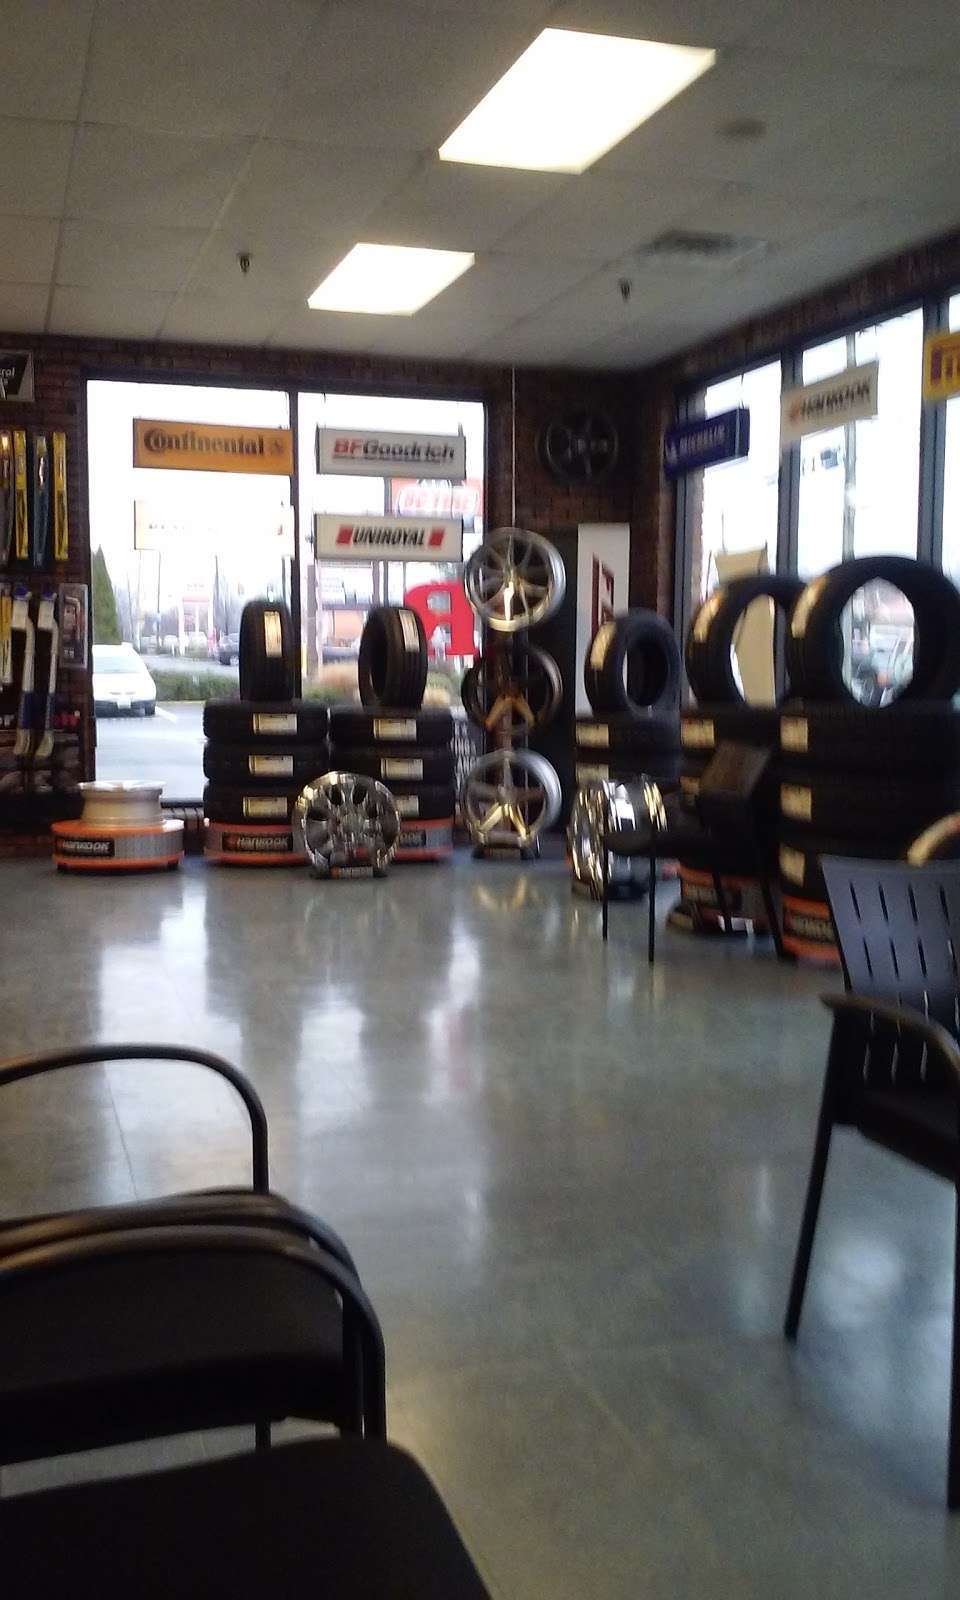 BC Tire & Complete Auto Service | 1266 Stelton Rd, Piscataway Township, NJ 08854, USA | Phone: (732) 985-6100